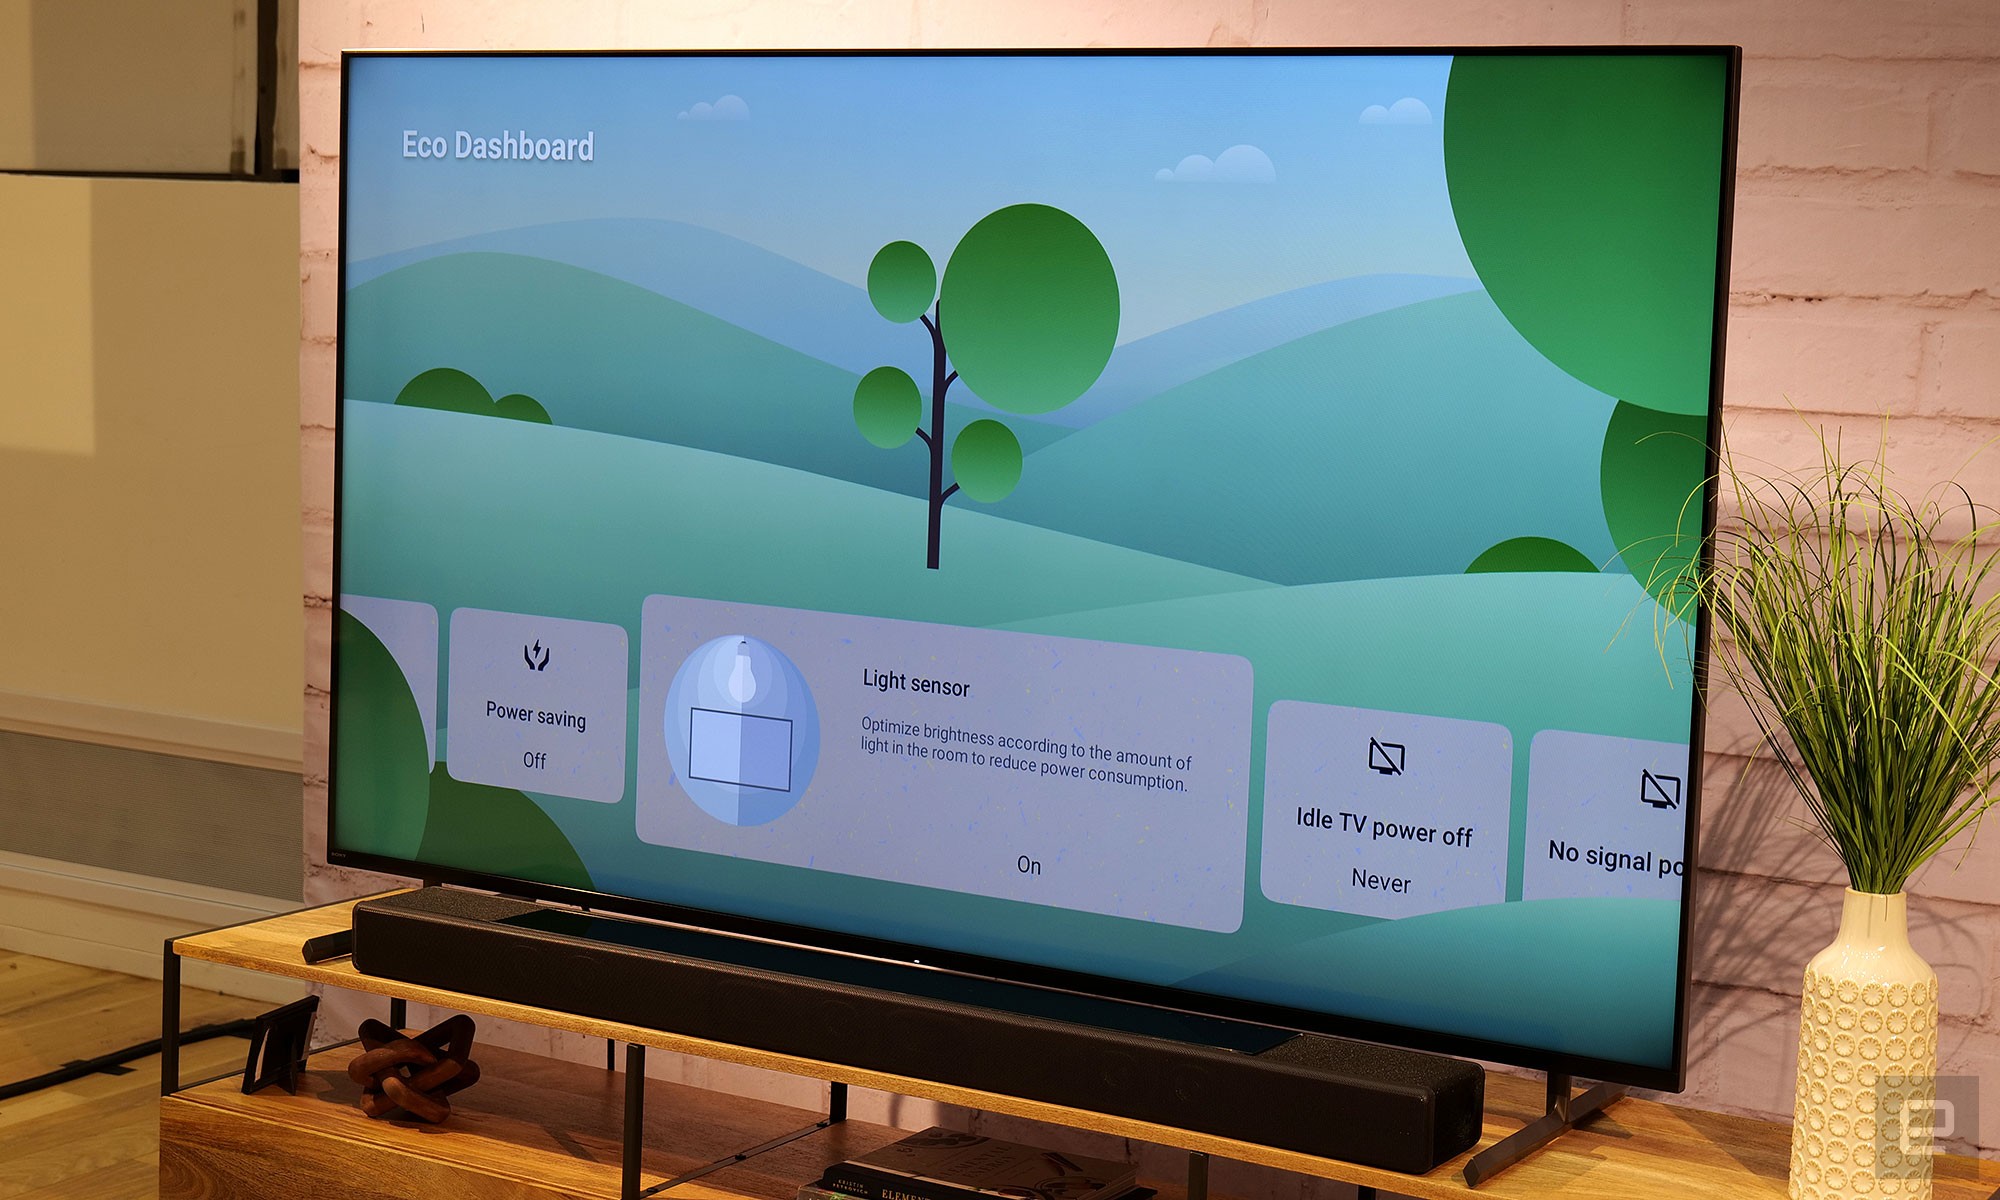 The new Eco dashboard in Sony's 2023 Bravia XR TVs makes it easy to turn on and adjust power-saving settings like brightness, idle power off times and more. " data-uuid="7d2ce772-00b3-3e79-a6bd-0dcd6d364faa